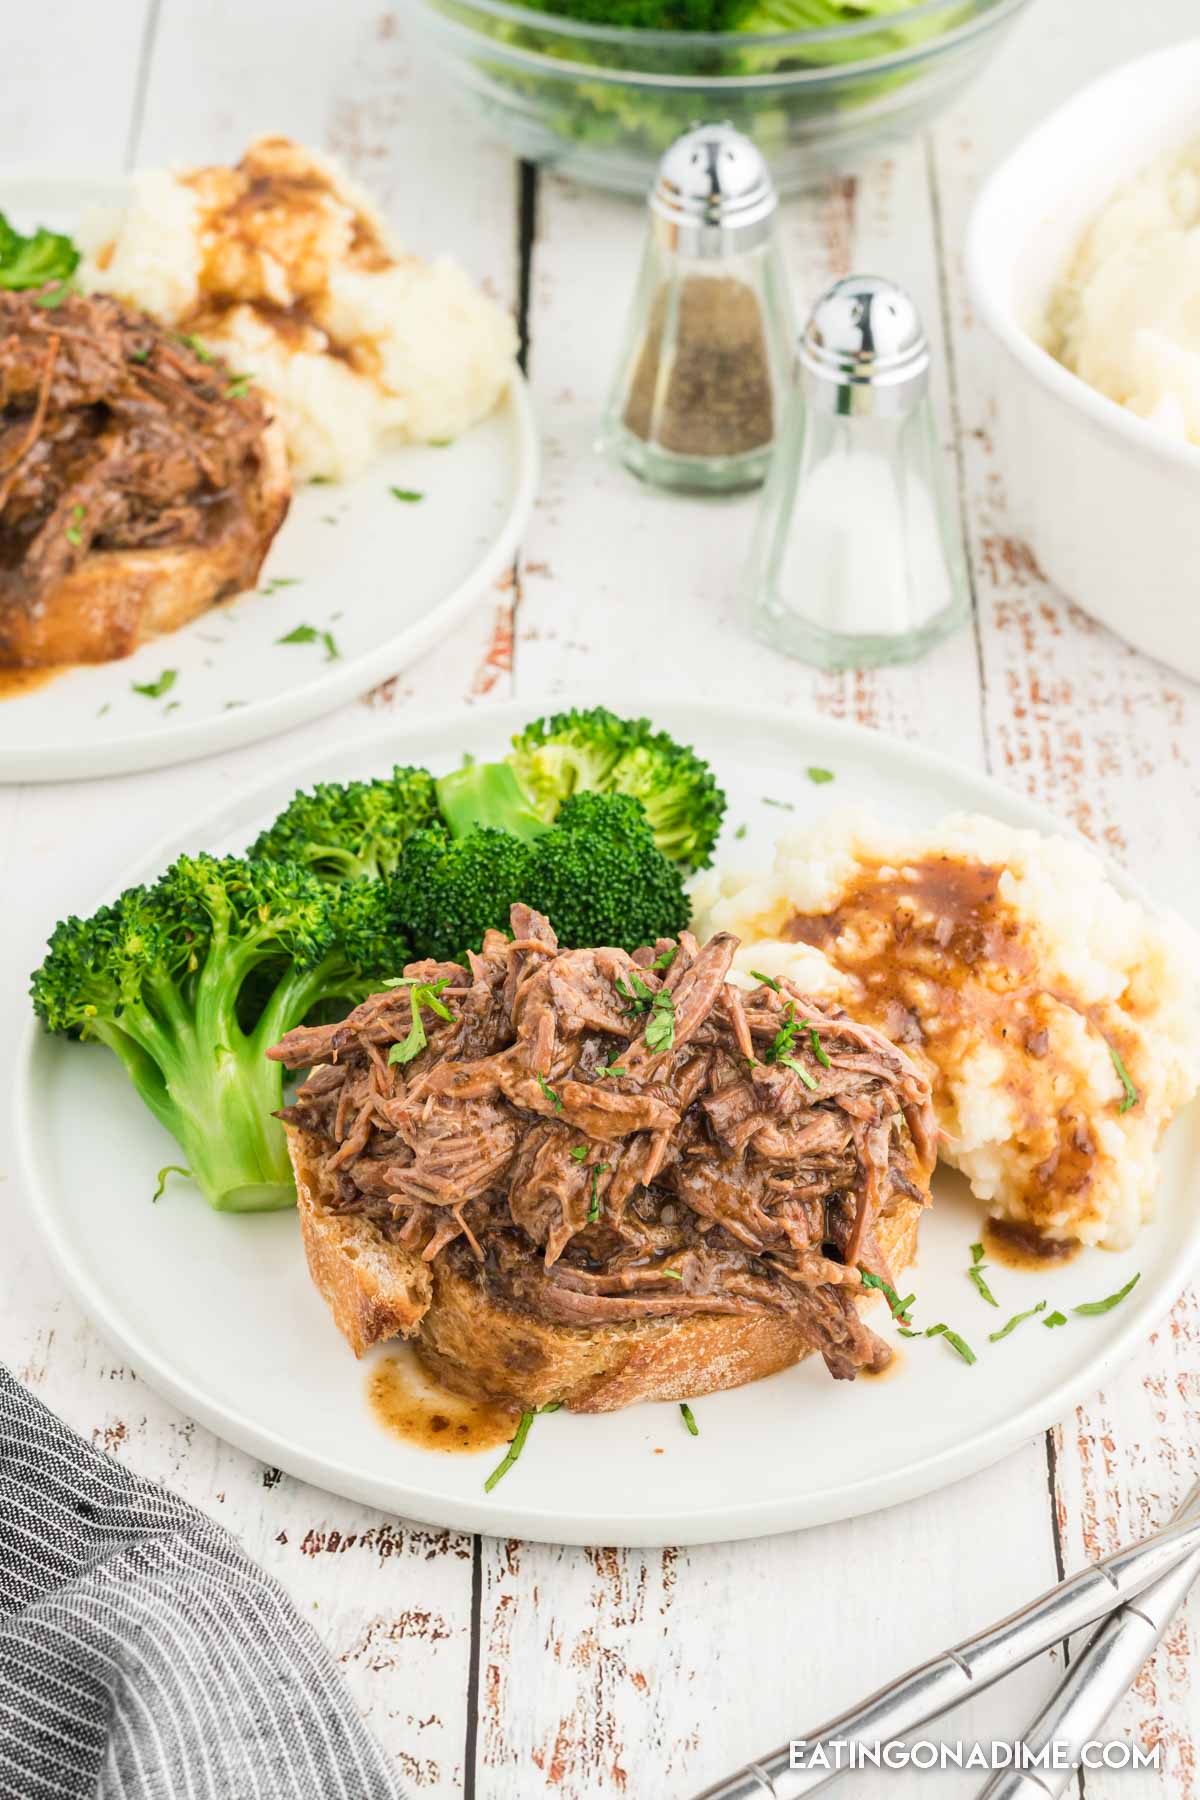 Shredded Roast Beef Sandwiches on a plate with a side of broccoli and mashed potatoes and gravy